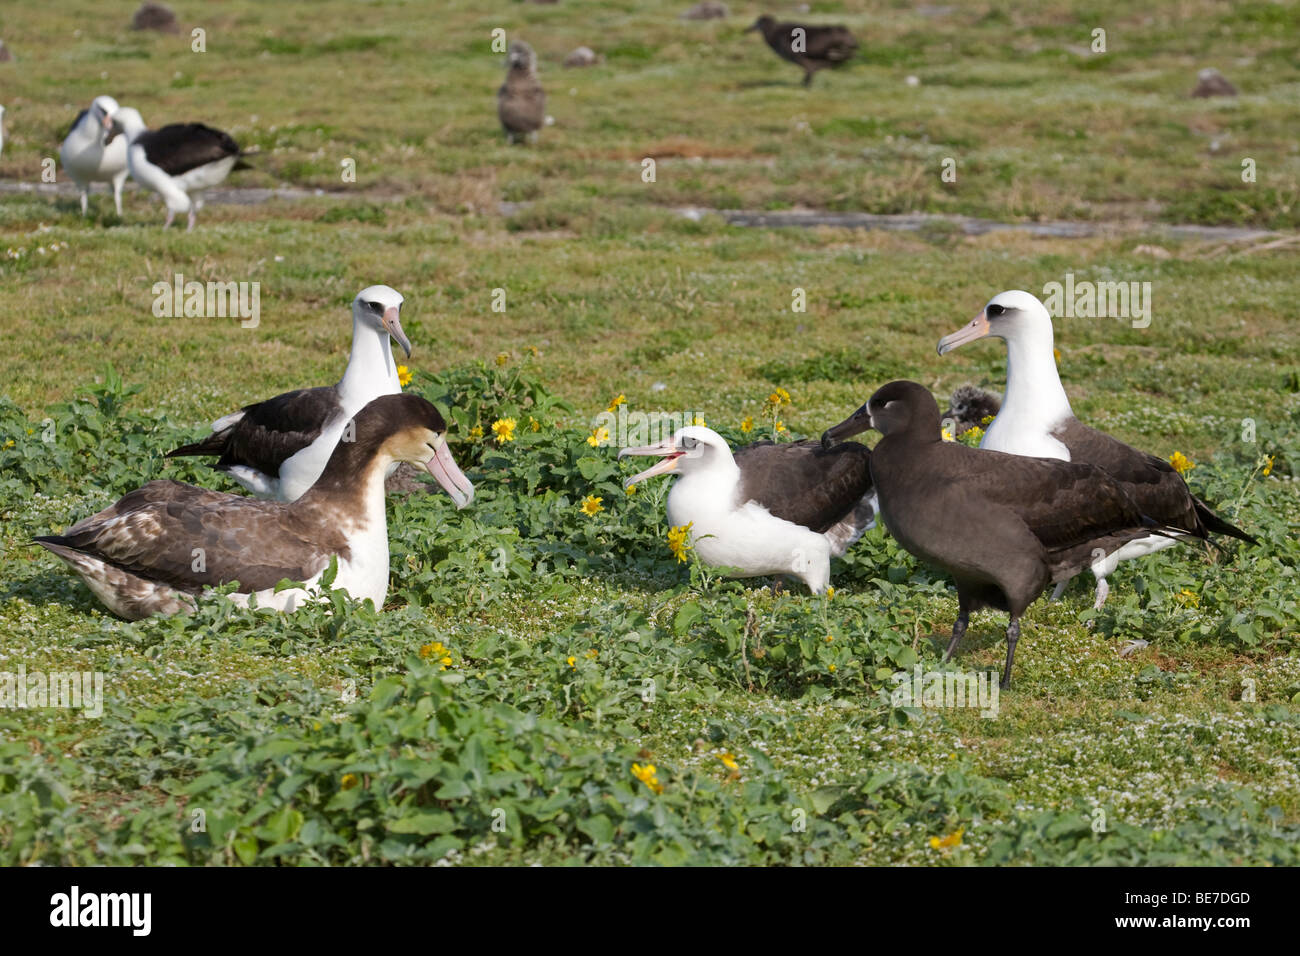 Courtship interaction among 3 different bird species: subadult Short-tailed Albatross, Laysan Albatross and Black-Footed Albatross on Midway Atoll Stock Photo